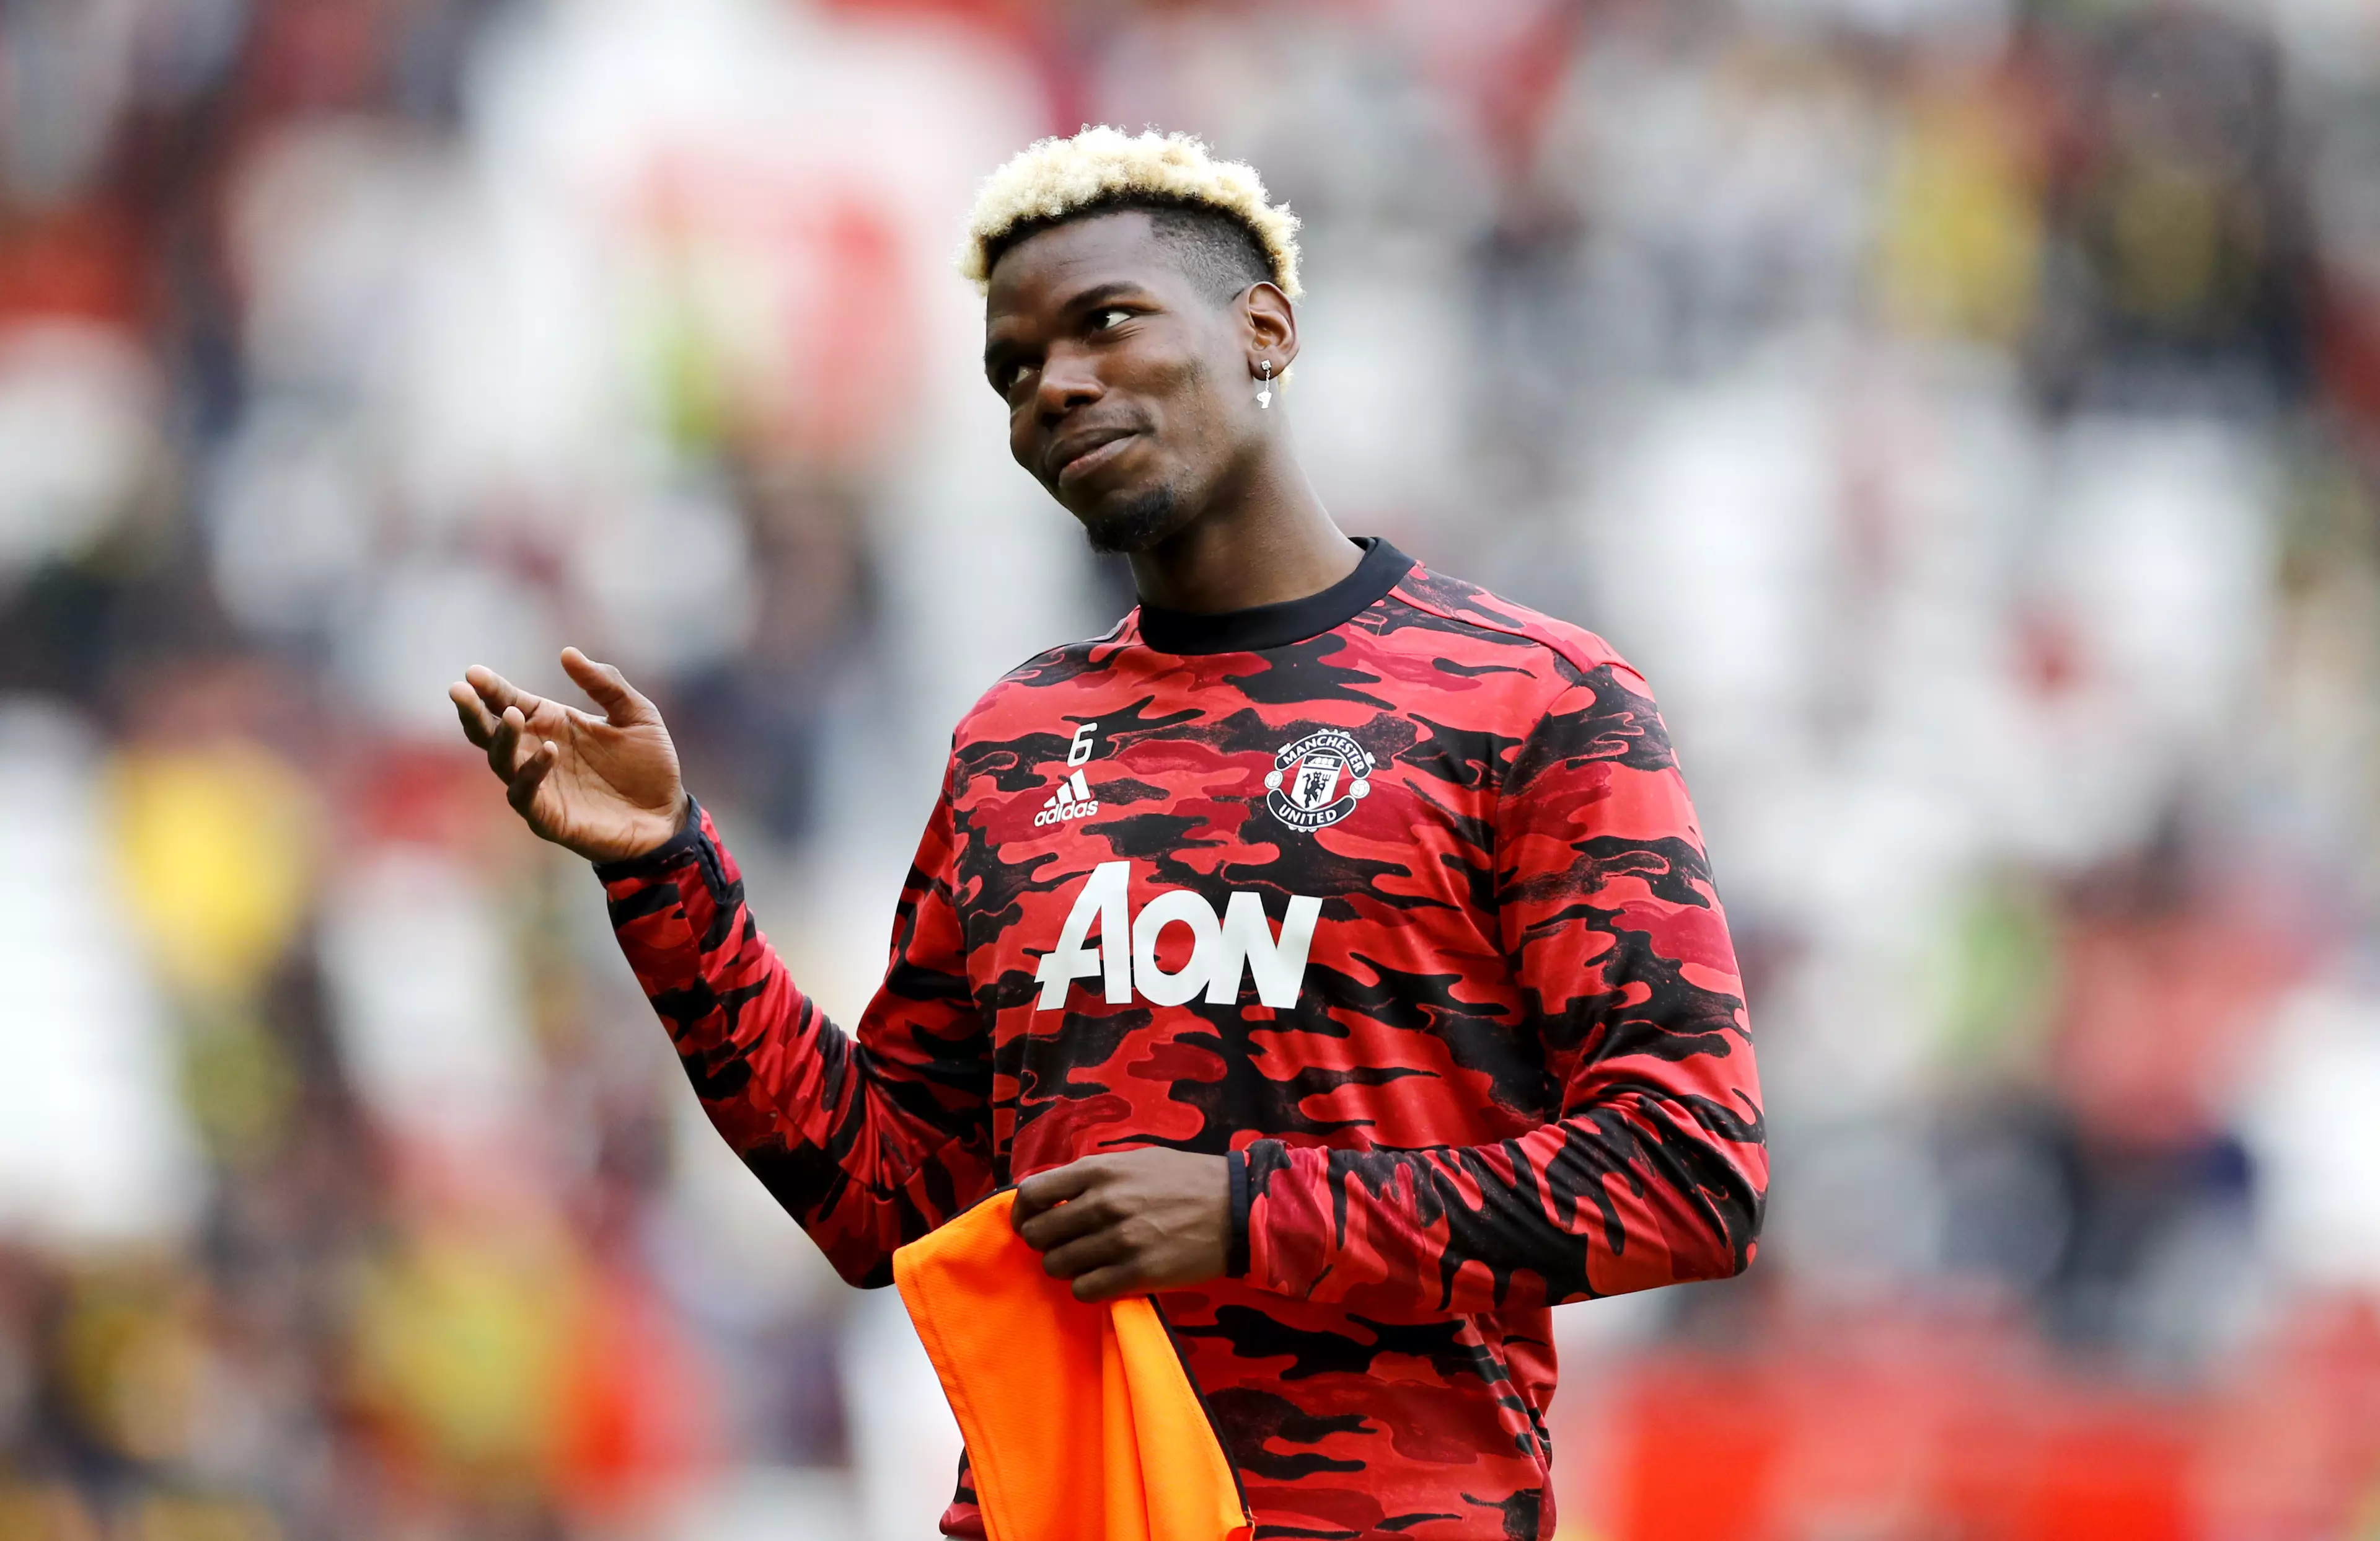 Rumours of Paul Pogba's departure refuse to go away. Image: PA Images